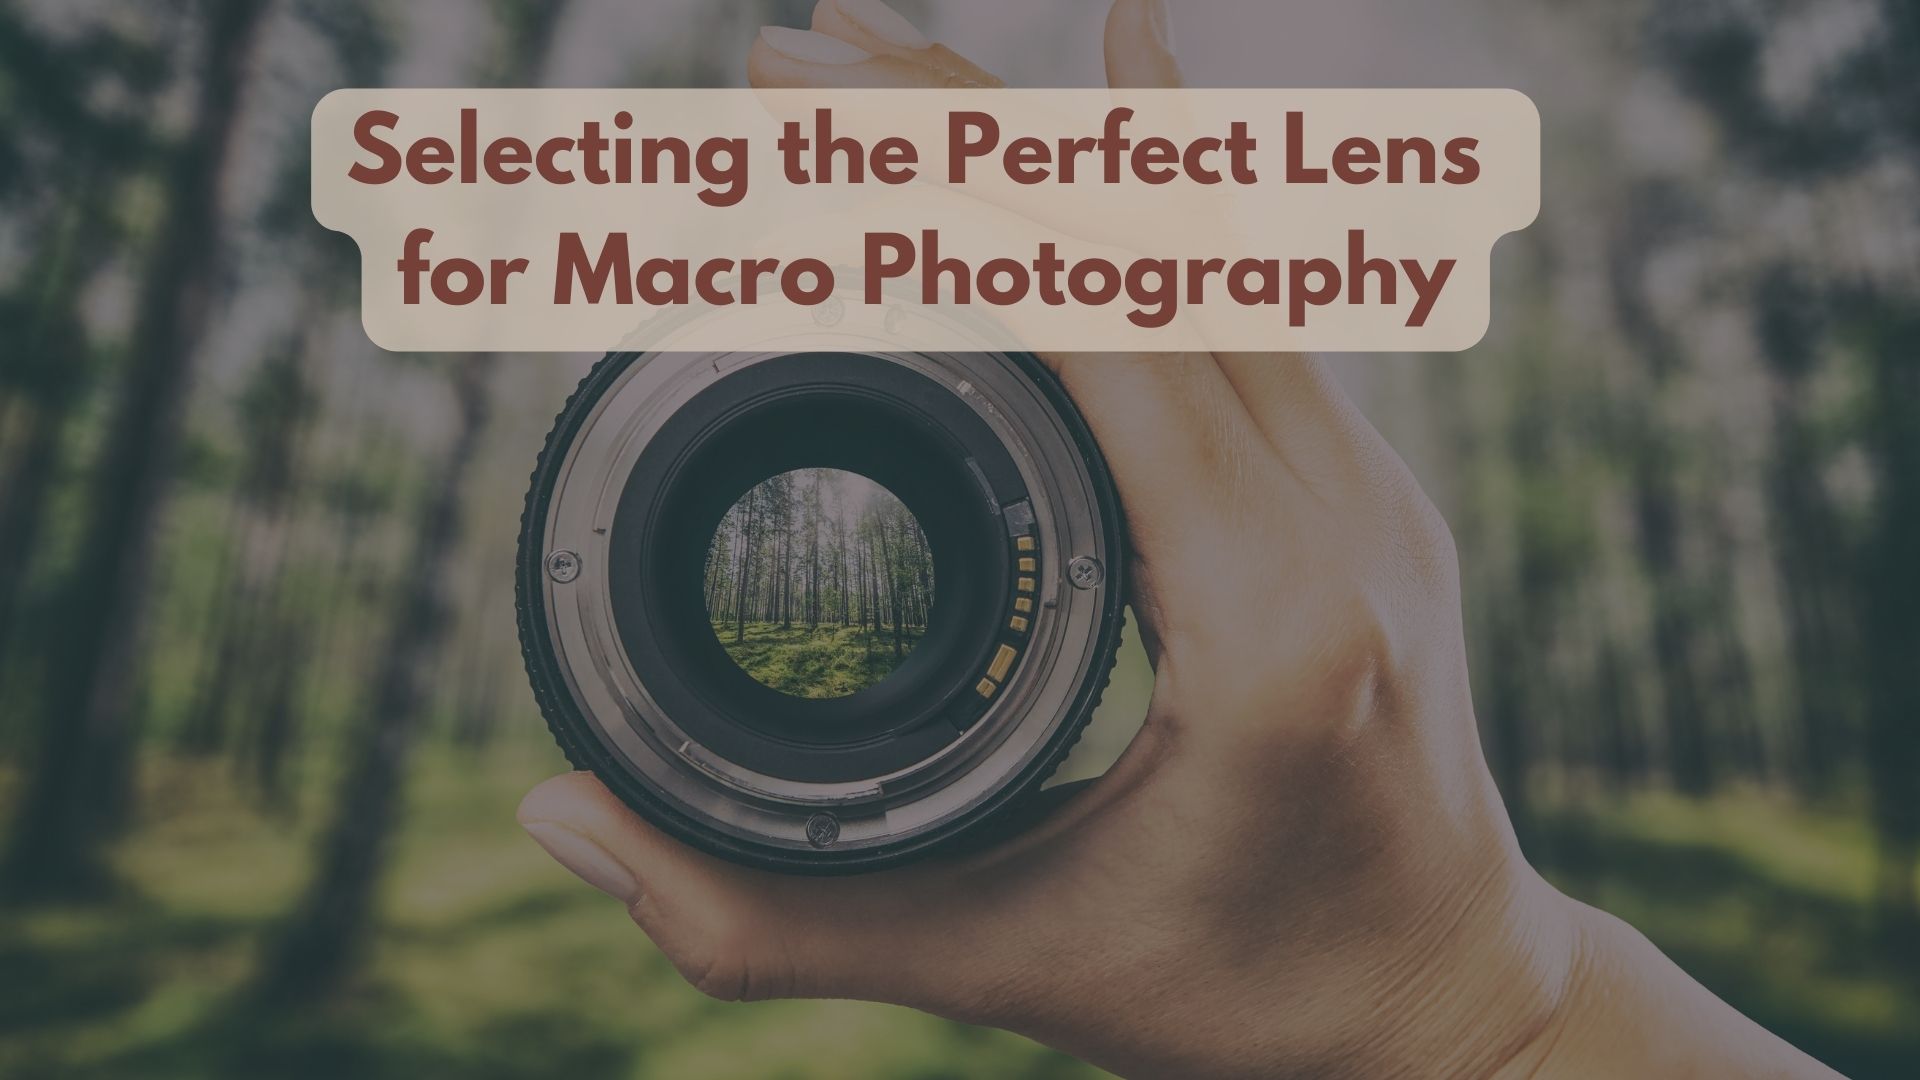 A Guide to Selecting the Perfect Lens for Macro Photography